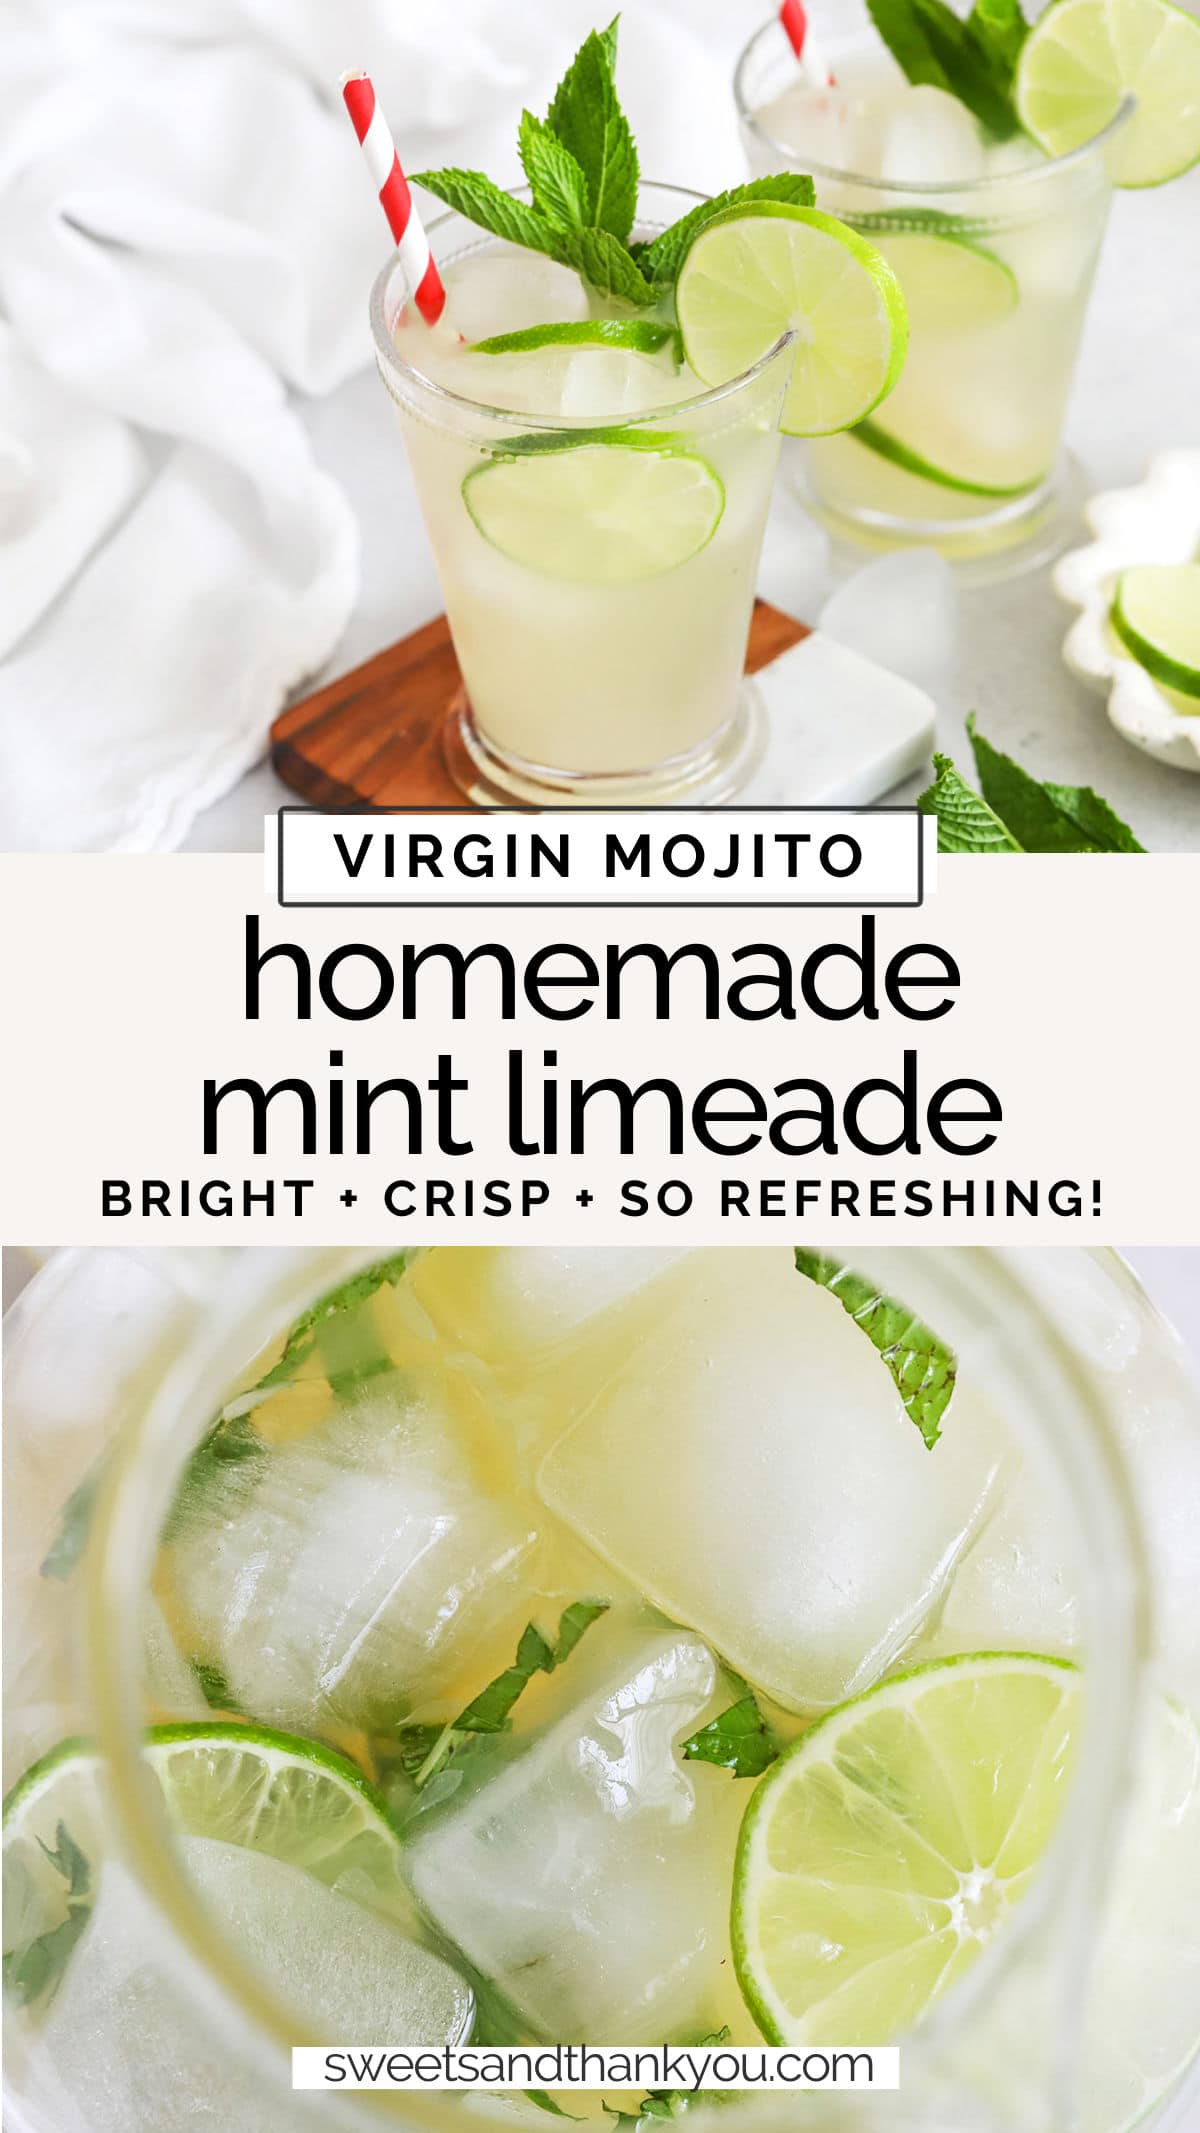 Mint Limeade AKA Virgin Mojitos! - This homemade limeade is kissed with fresh mint & tastes amazing. It's the perfect non-alcoholic drink for a celebration! // non alcoholic mojitos // virgin mojito recipe // homemade limeade recipe // cafe rio limeade / mocktail / lime mocktail / summer mocktail / summer drink / limeade from scratch / lime lemonade / lime drink recipe / lime drinks